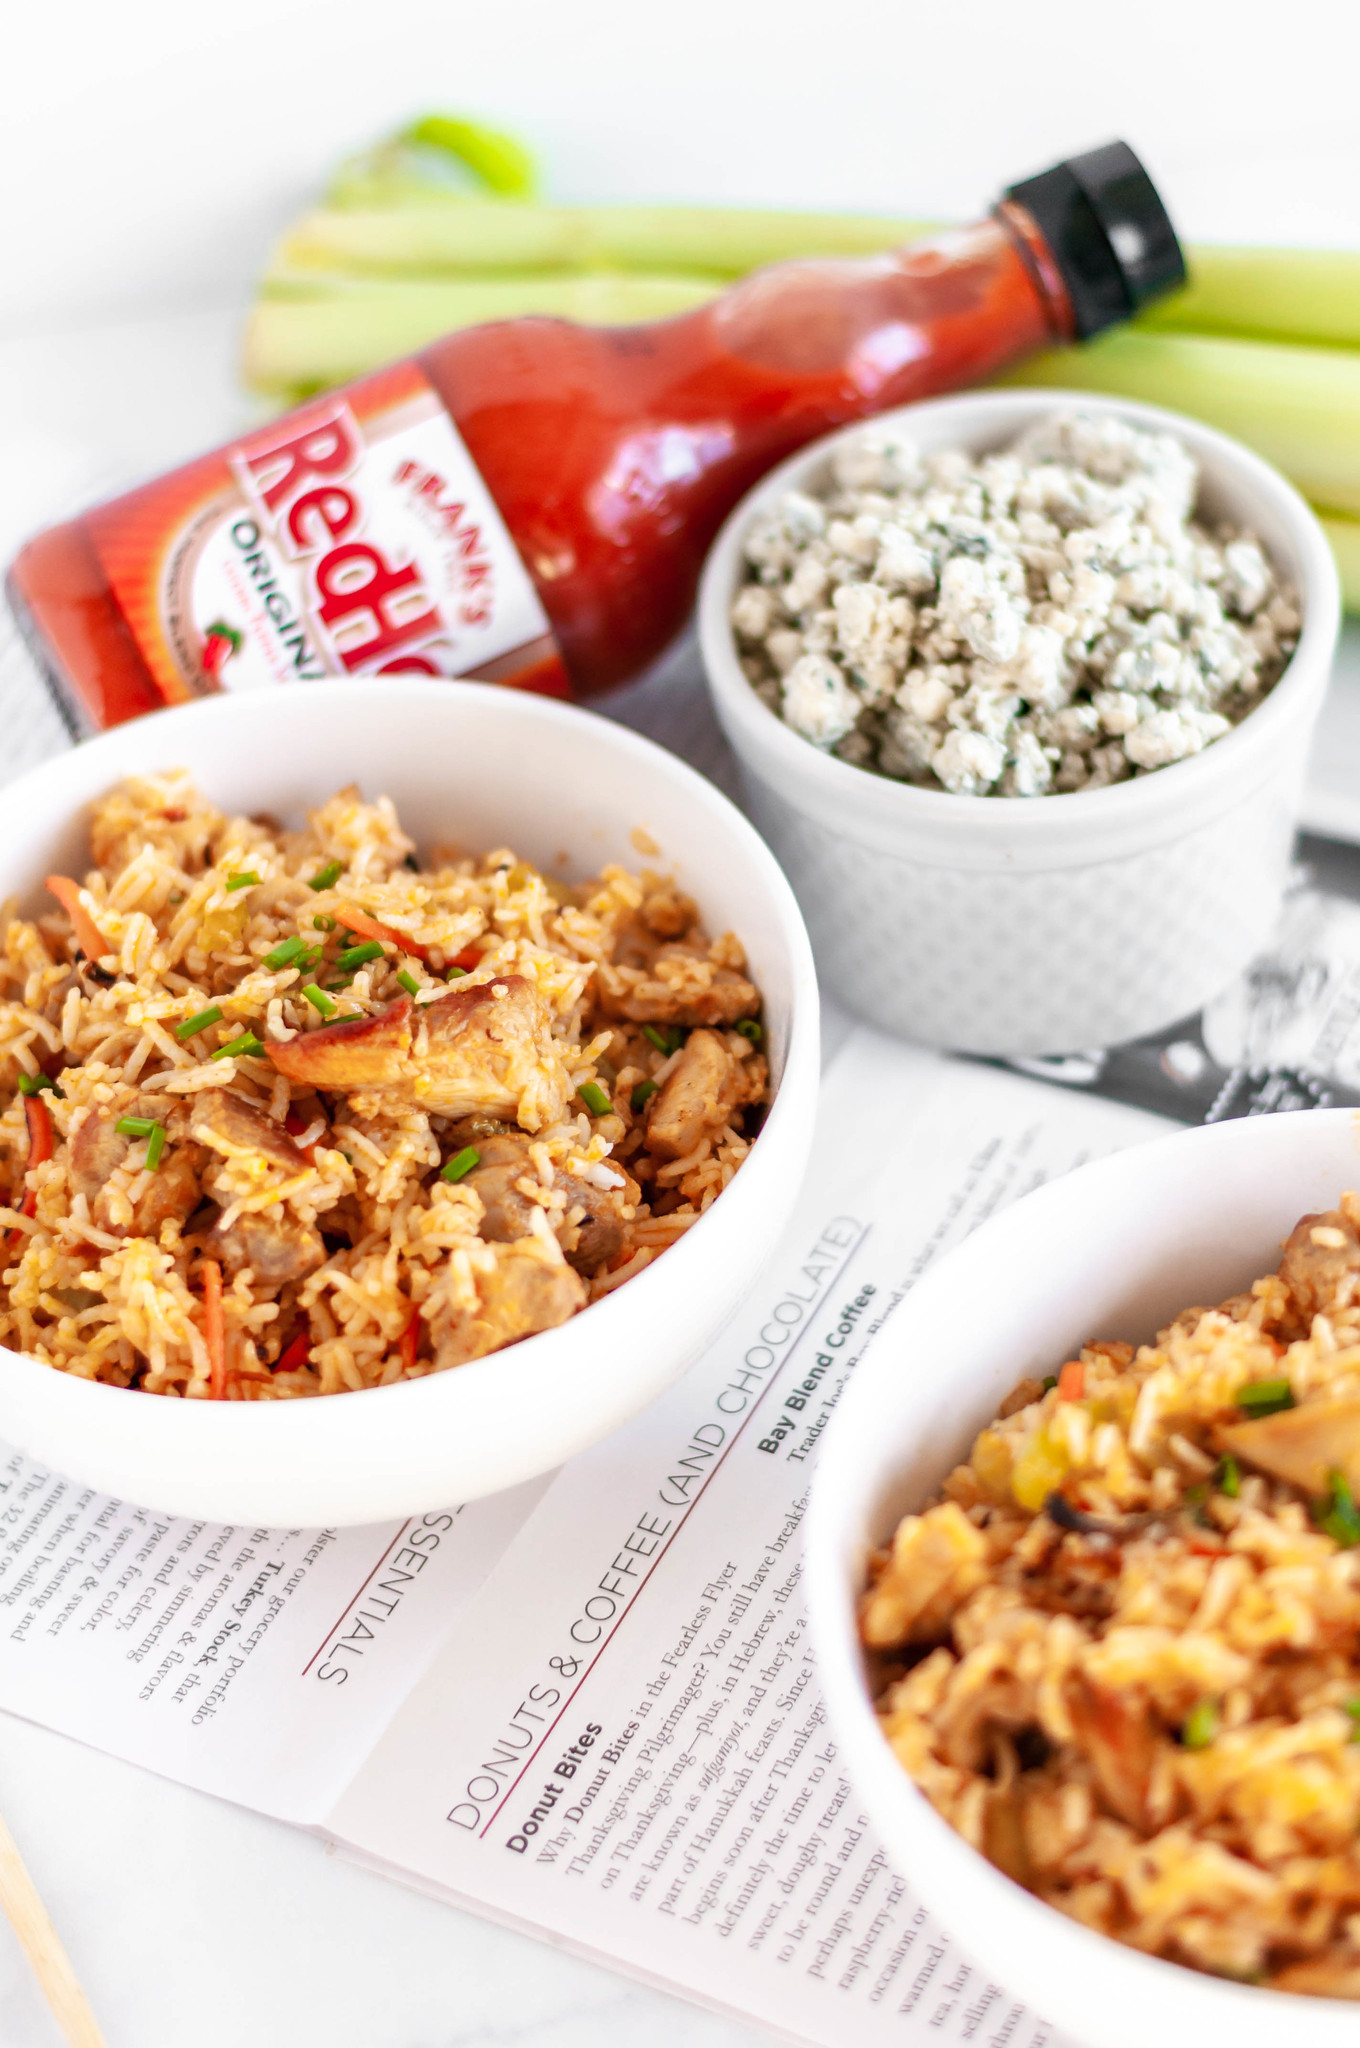 Buffalo Fried Rice is a super simple, flavorful and spicy dinner you can whip up in less than 30 minutes with some leftover rice. Spicy buffalo chicken, carrots, celery and buffalo sauce with a sprinkle of crumbled blue cheese.